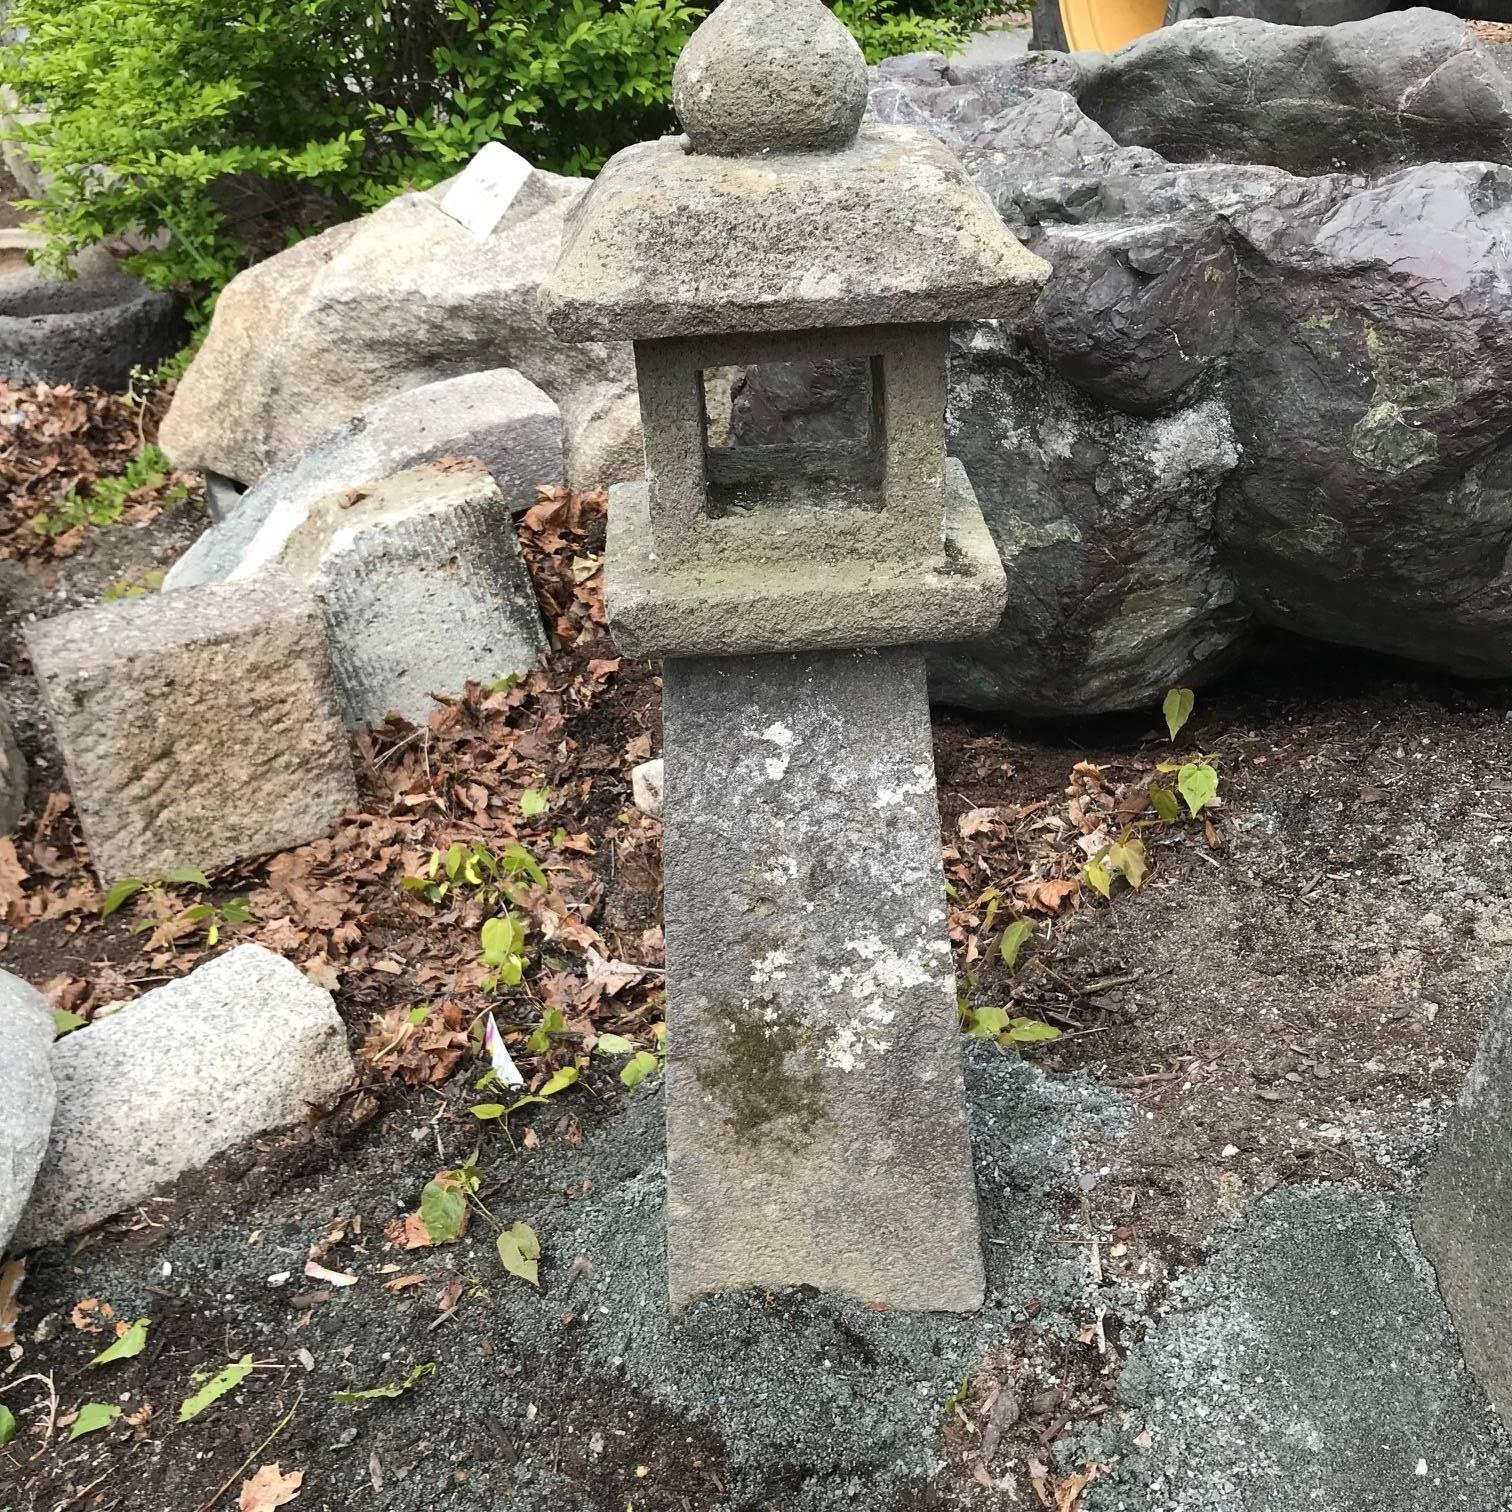 Seldom available- a rare petite antique beauty. 

Japan, a fine pathway stone lantern with original and beautiful lichen and patina from great age

They work especially well at night with an oil candle.  See our photo. 
Upon request, we will include